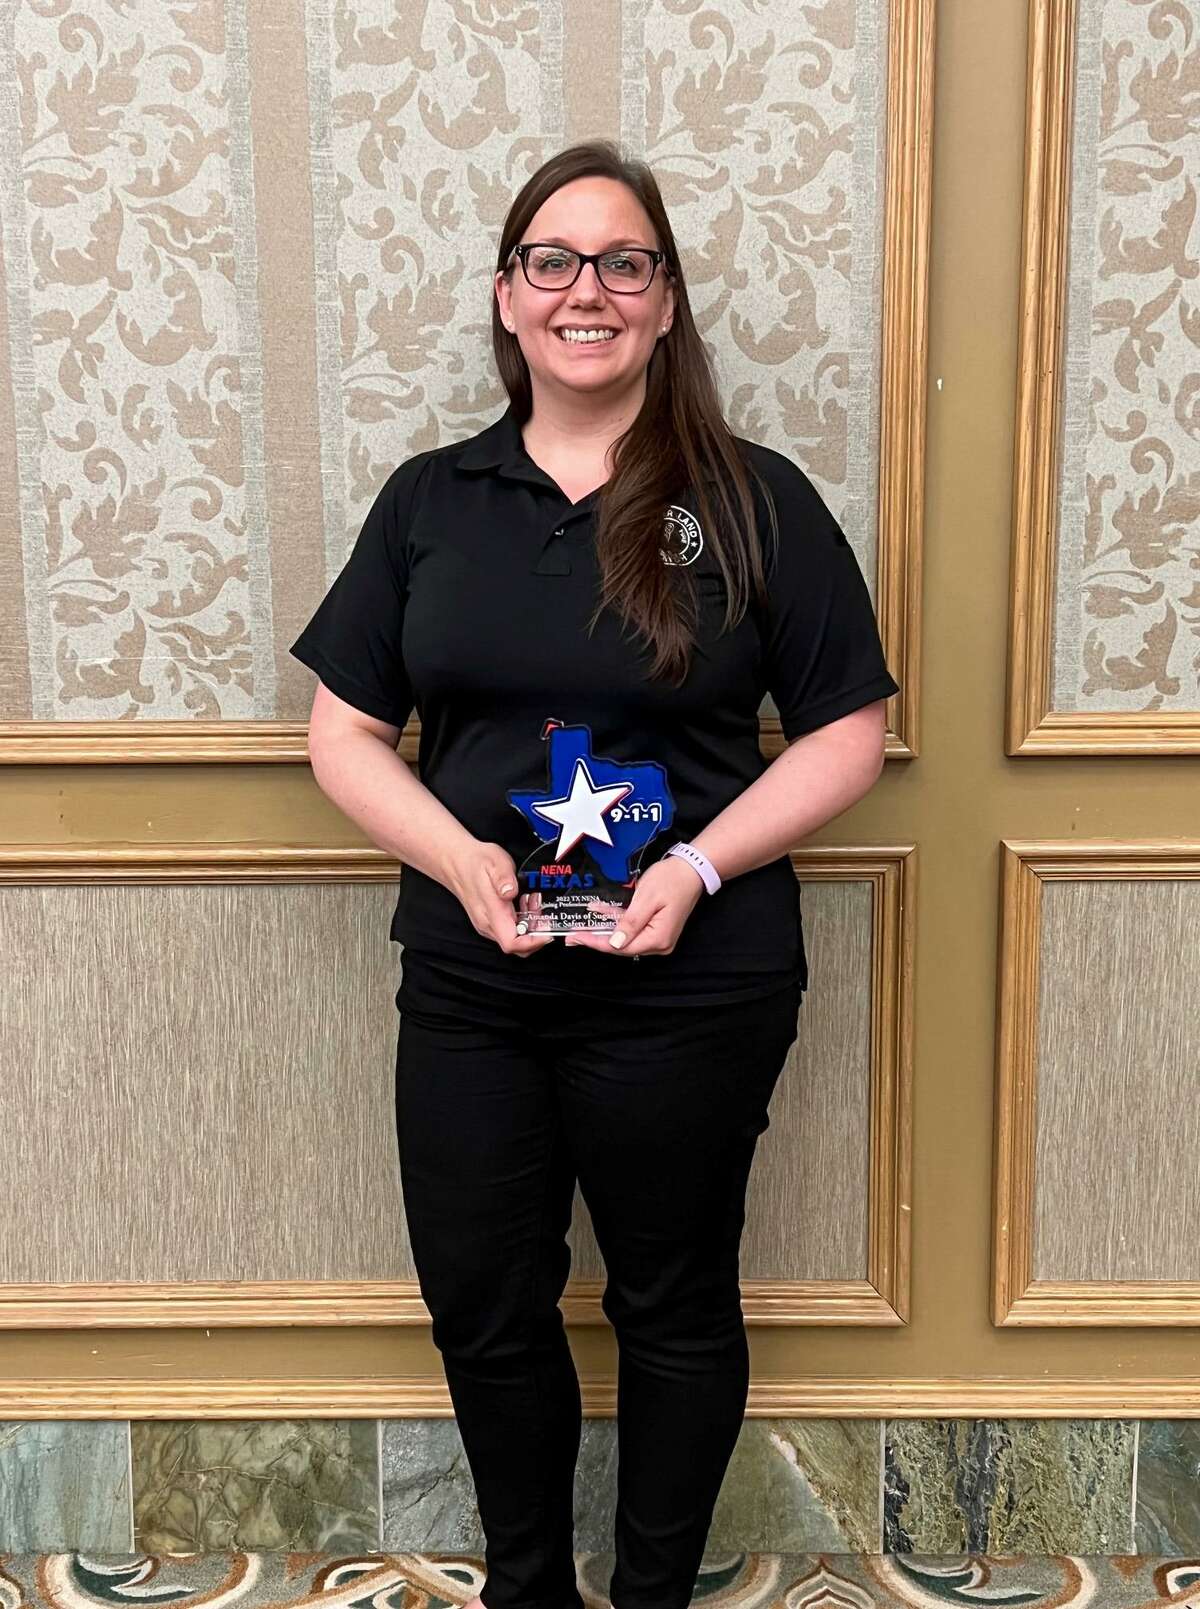 Sugar Land Public Safety Dispatcher Amanda Davis was named the 2021 Training Professional of the Year by the Texas National Emergency Number Association.